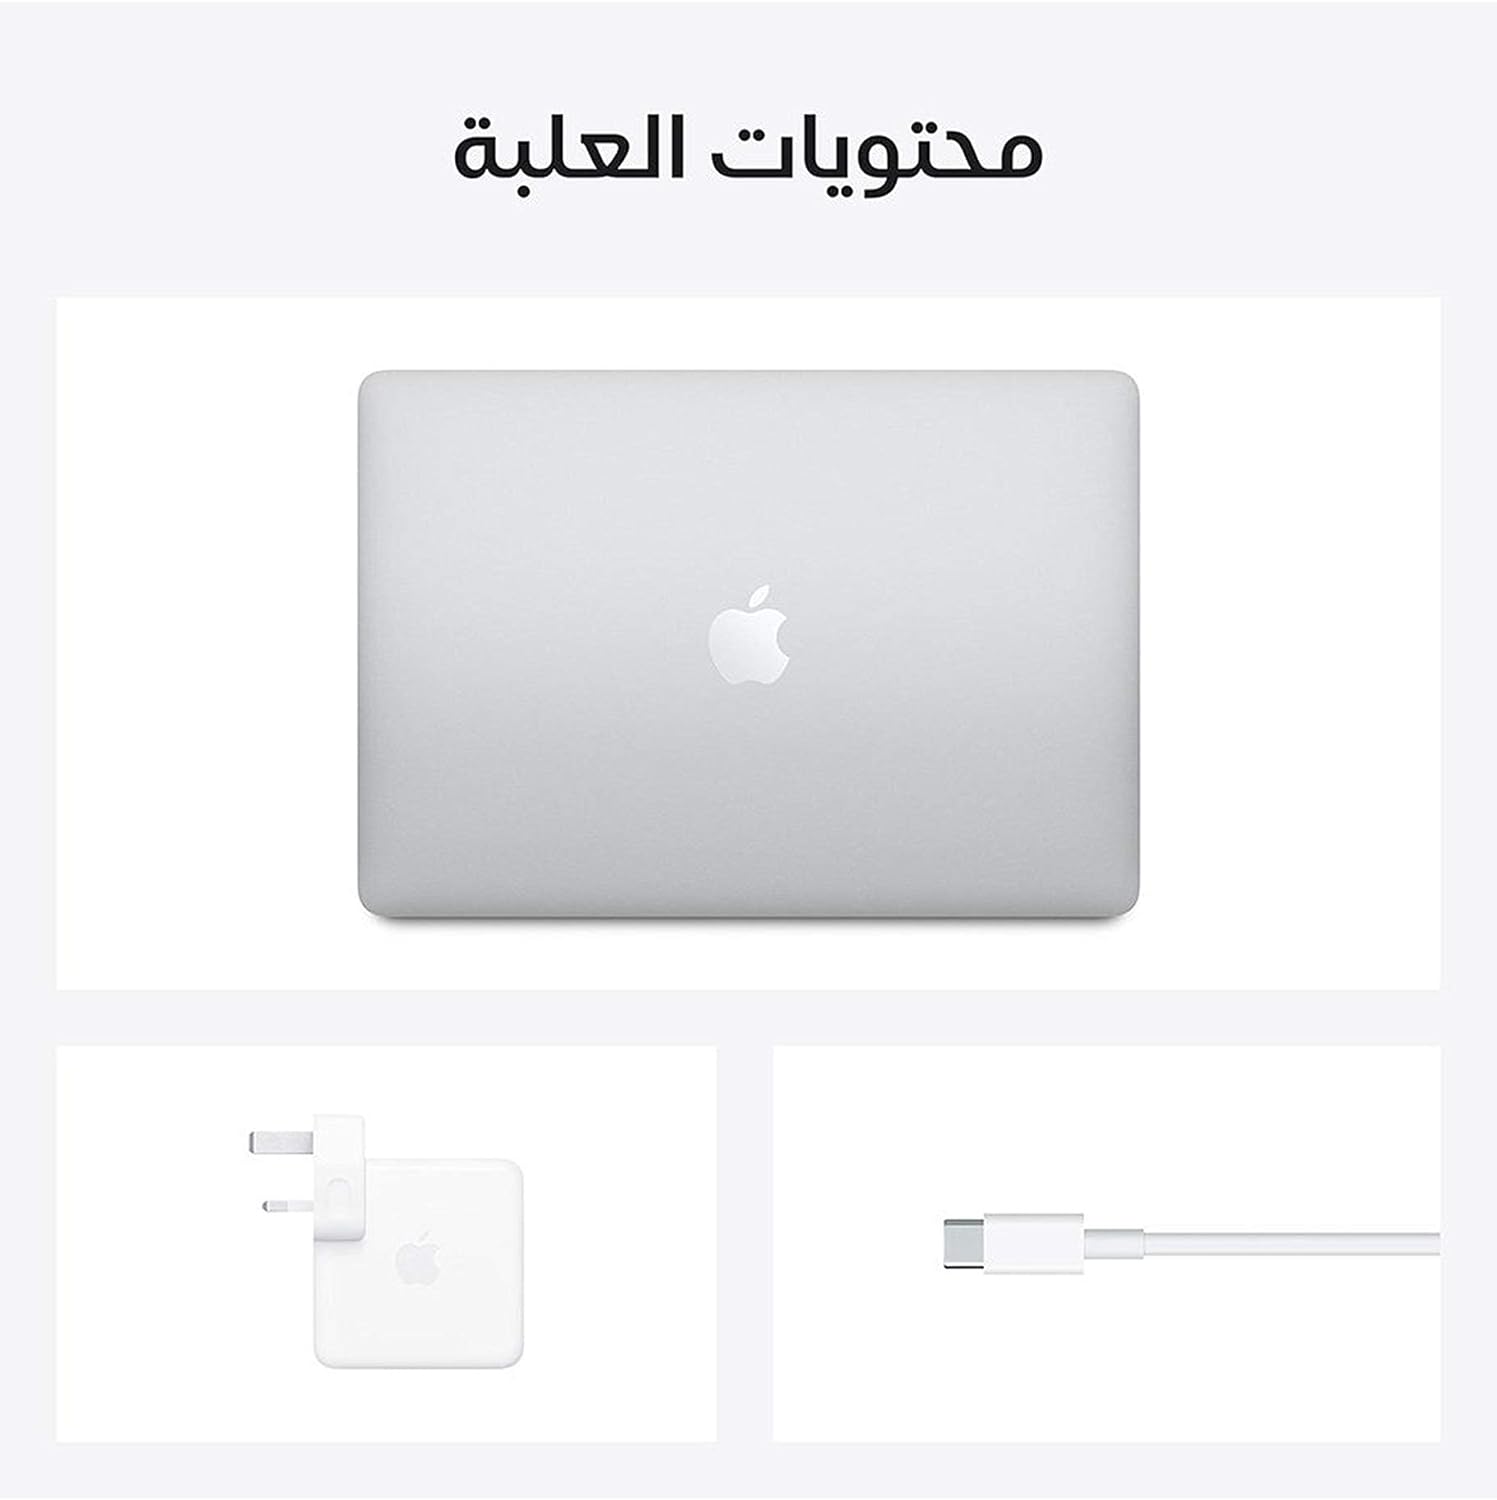 Apple MacBook Air 13-inch Laptop - Superfast Memory with 8GB RAM for responsive performance. 0194252057179